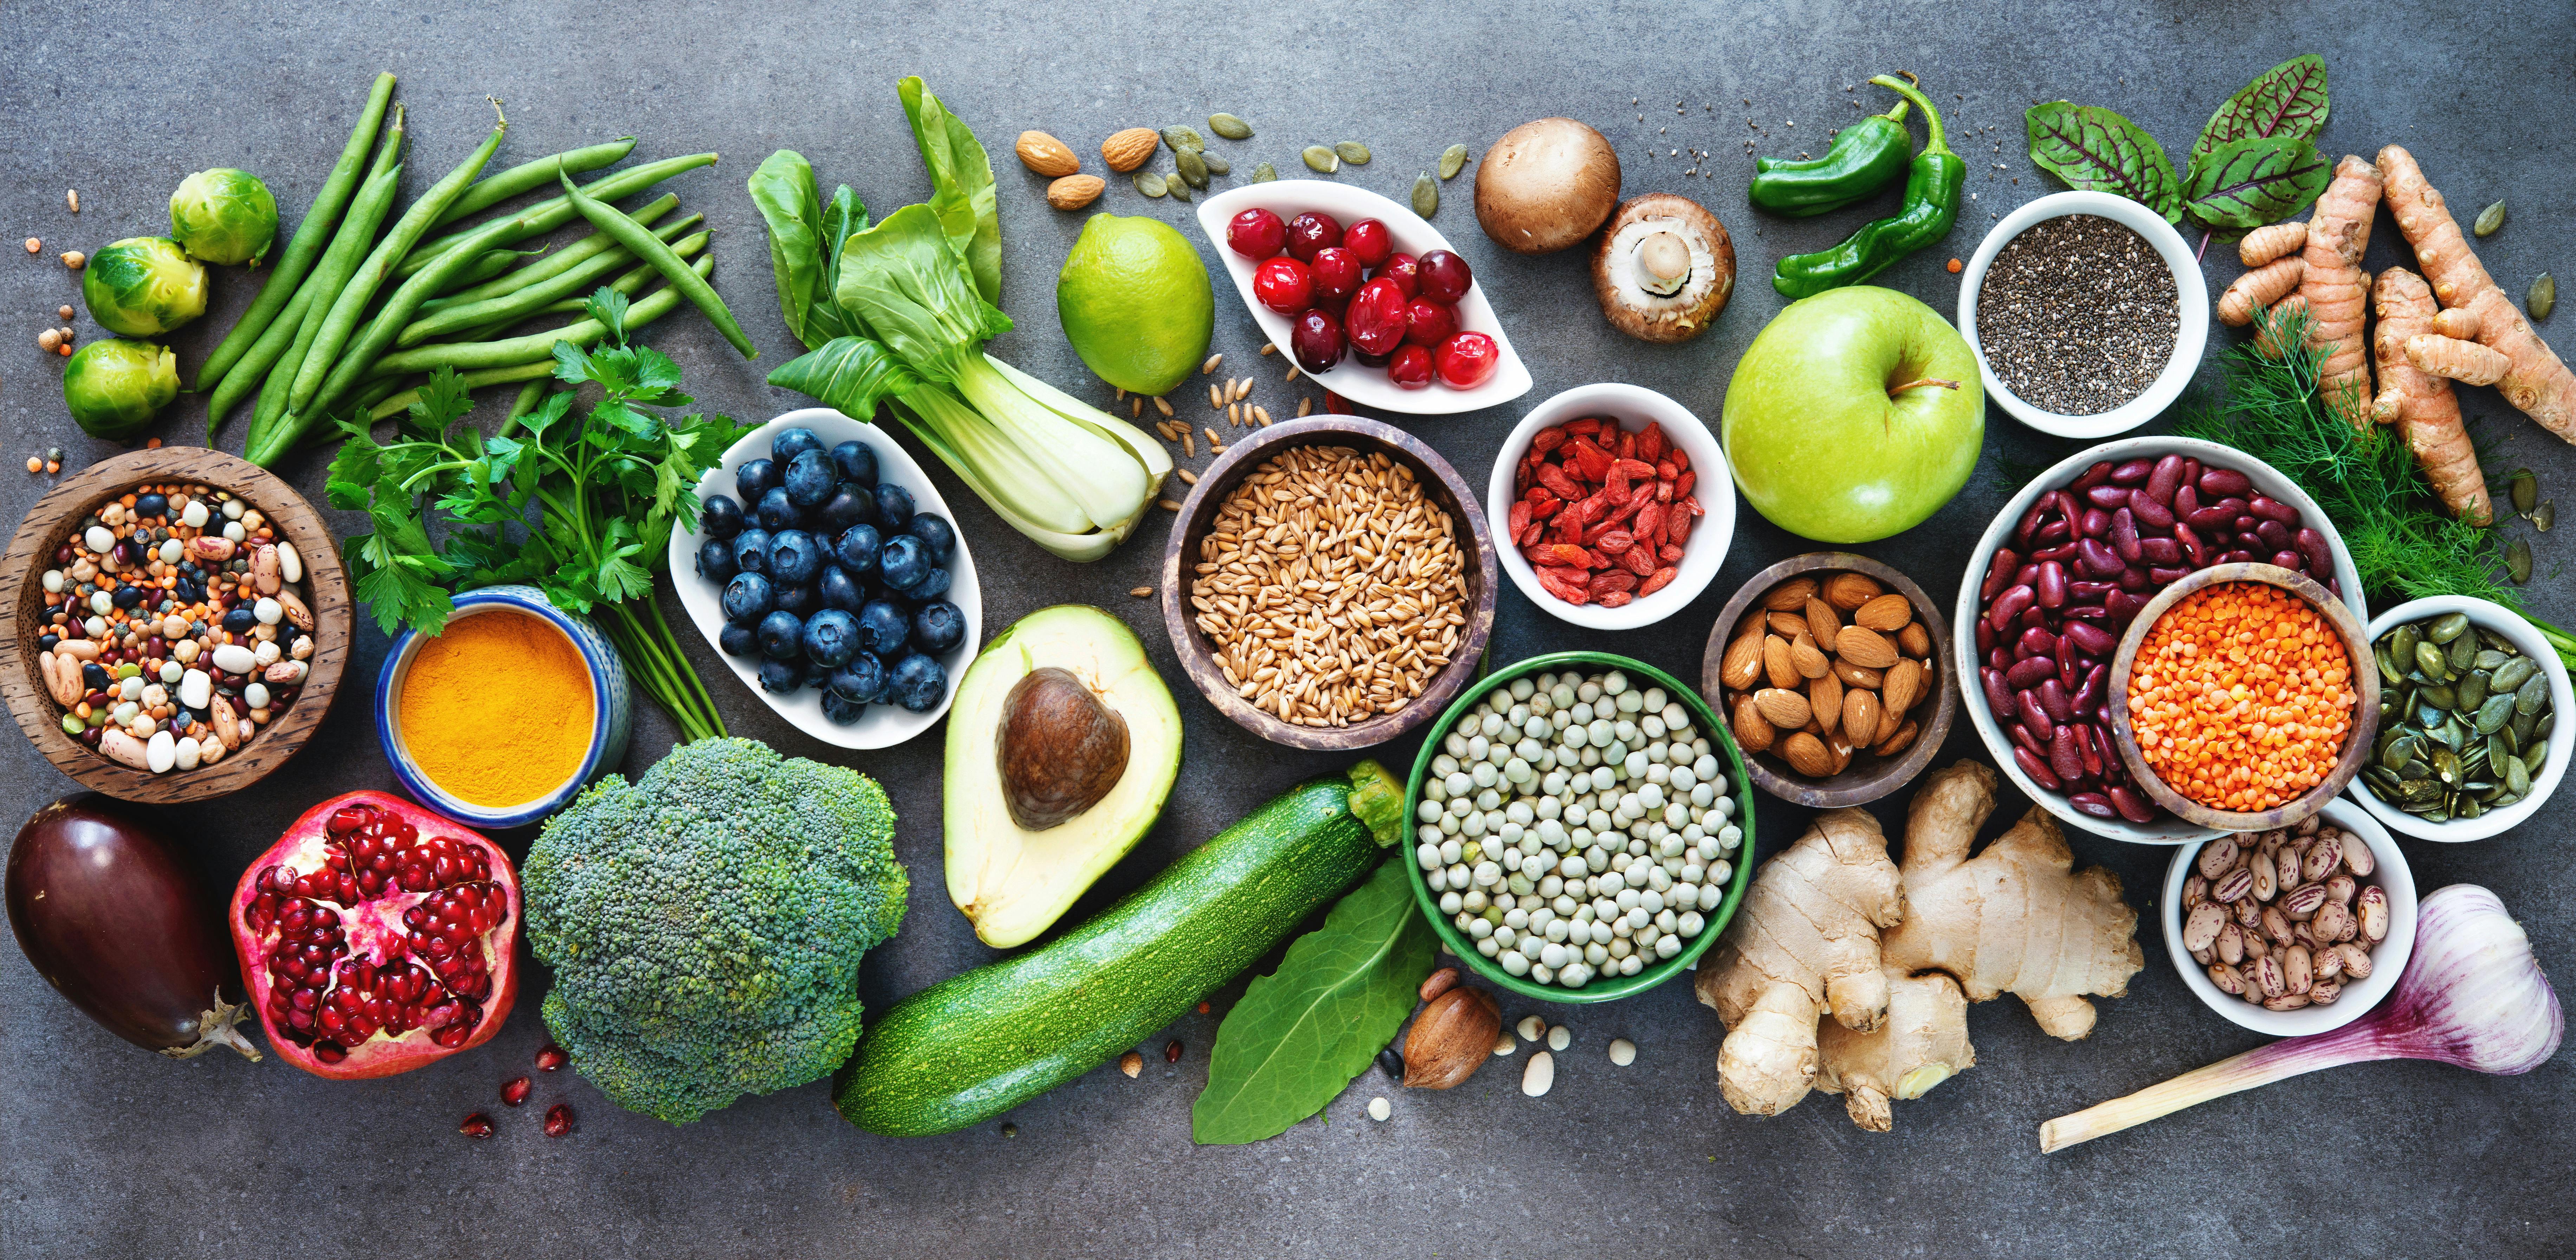 Healthy Foods: The Key to a Balanced Diet and Unparalleled Health Benefits